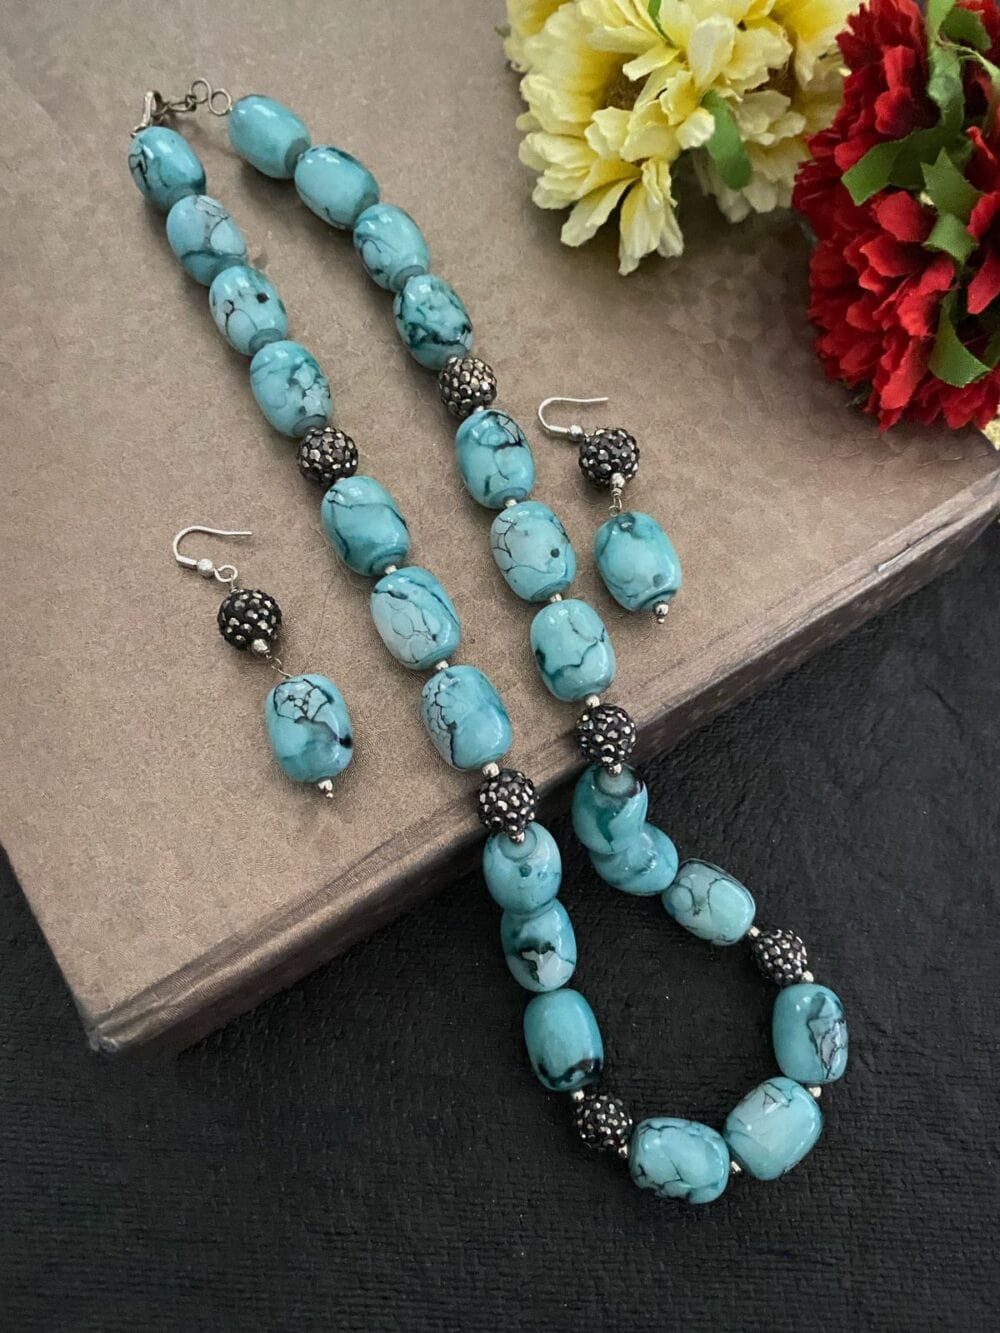 Designer Semi Precious Turquoise Blue Chalcedony Stone Beads Necklace By Gehna Shop Beads Jewellery